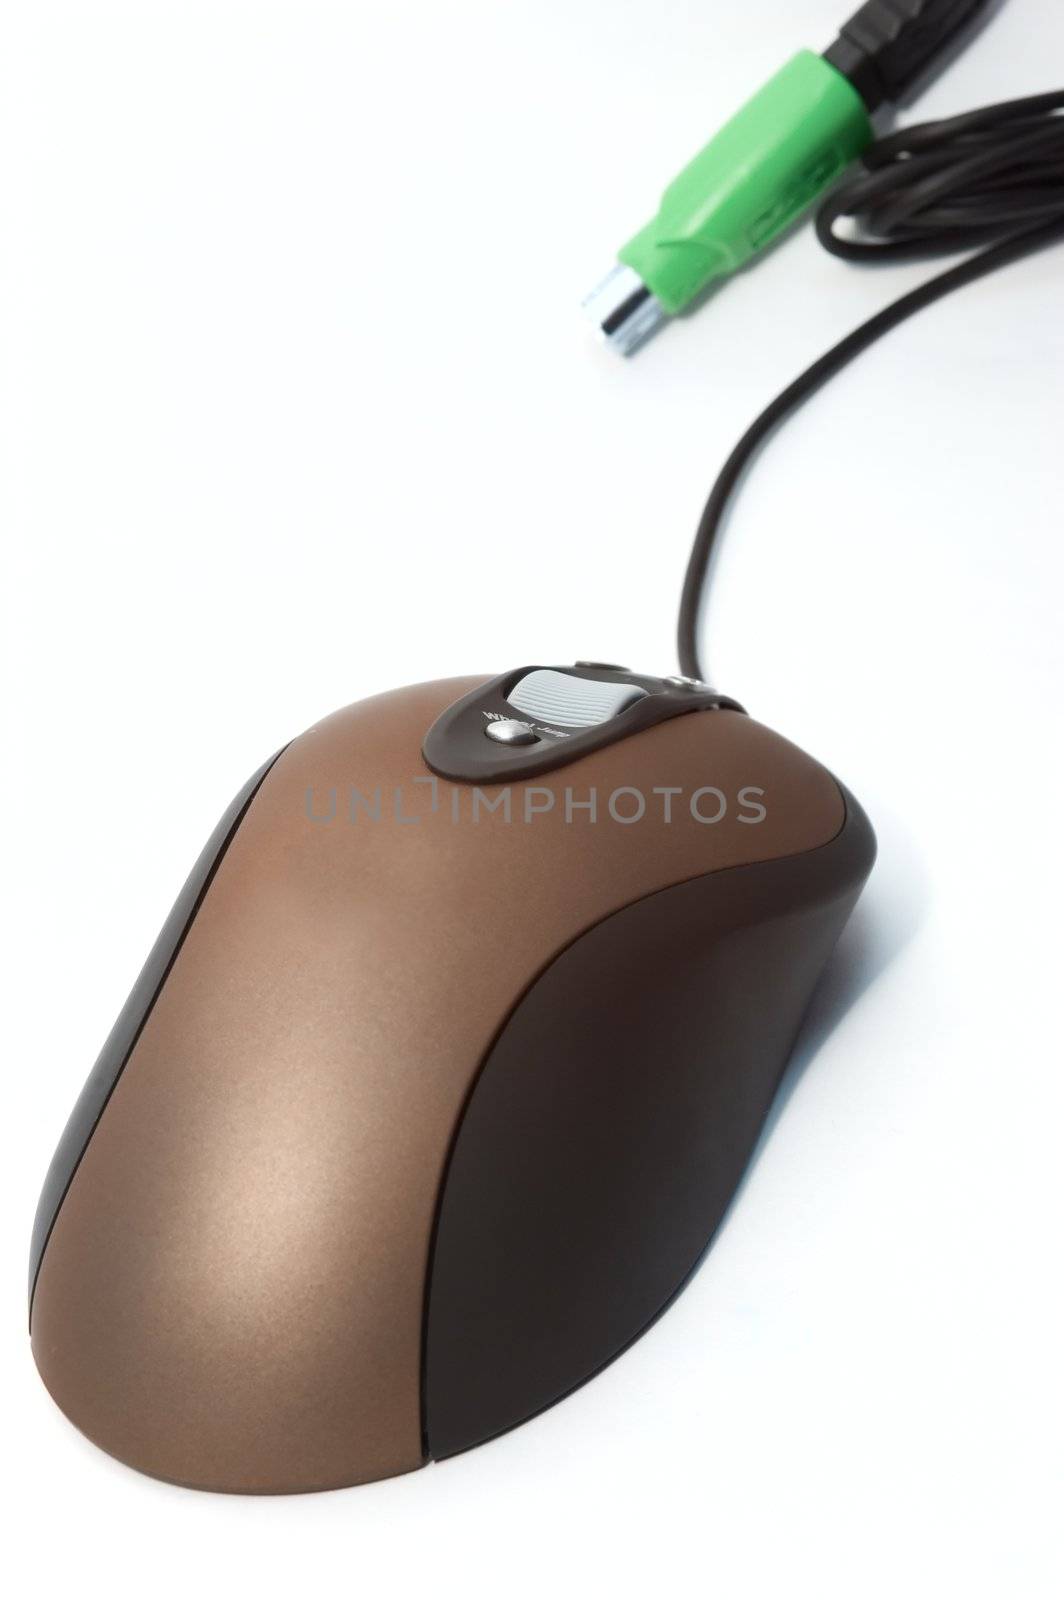 Computer modern laser mouse in isolated background